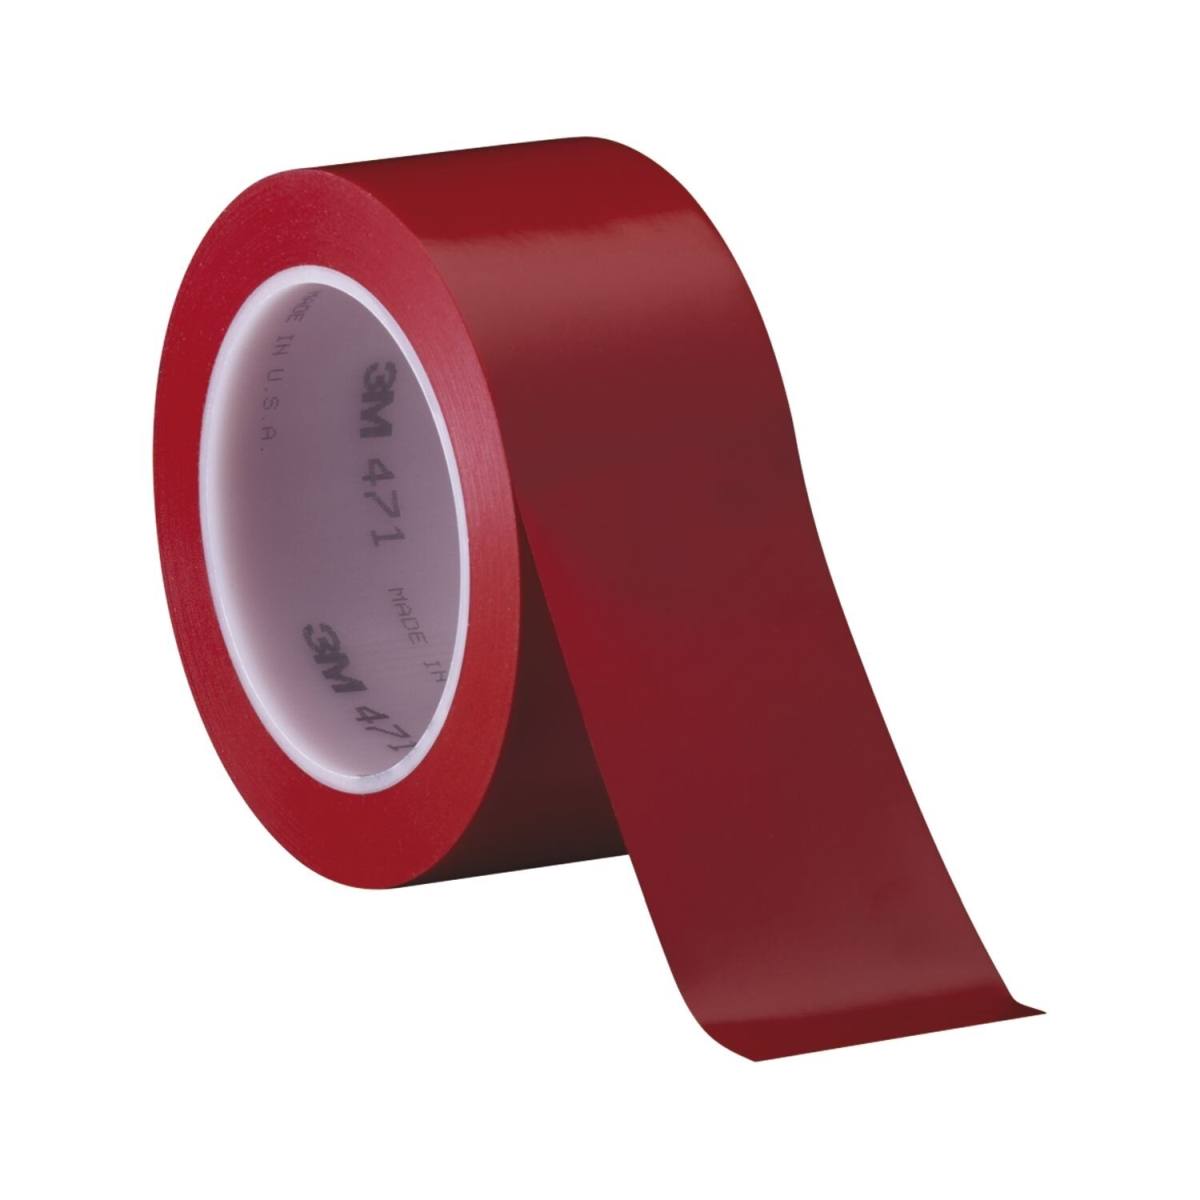 3M soft PVC adhesive tape 471 F, red, 50 mm x 33 m, 0.13 mm, individually and practically packed